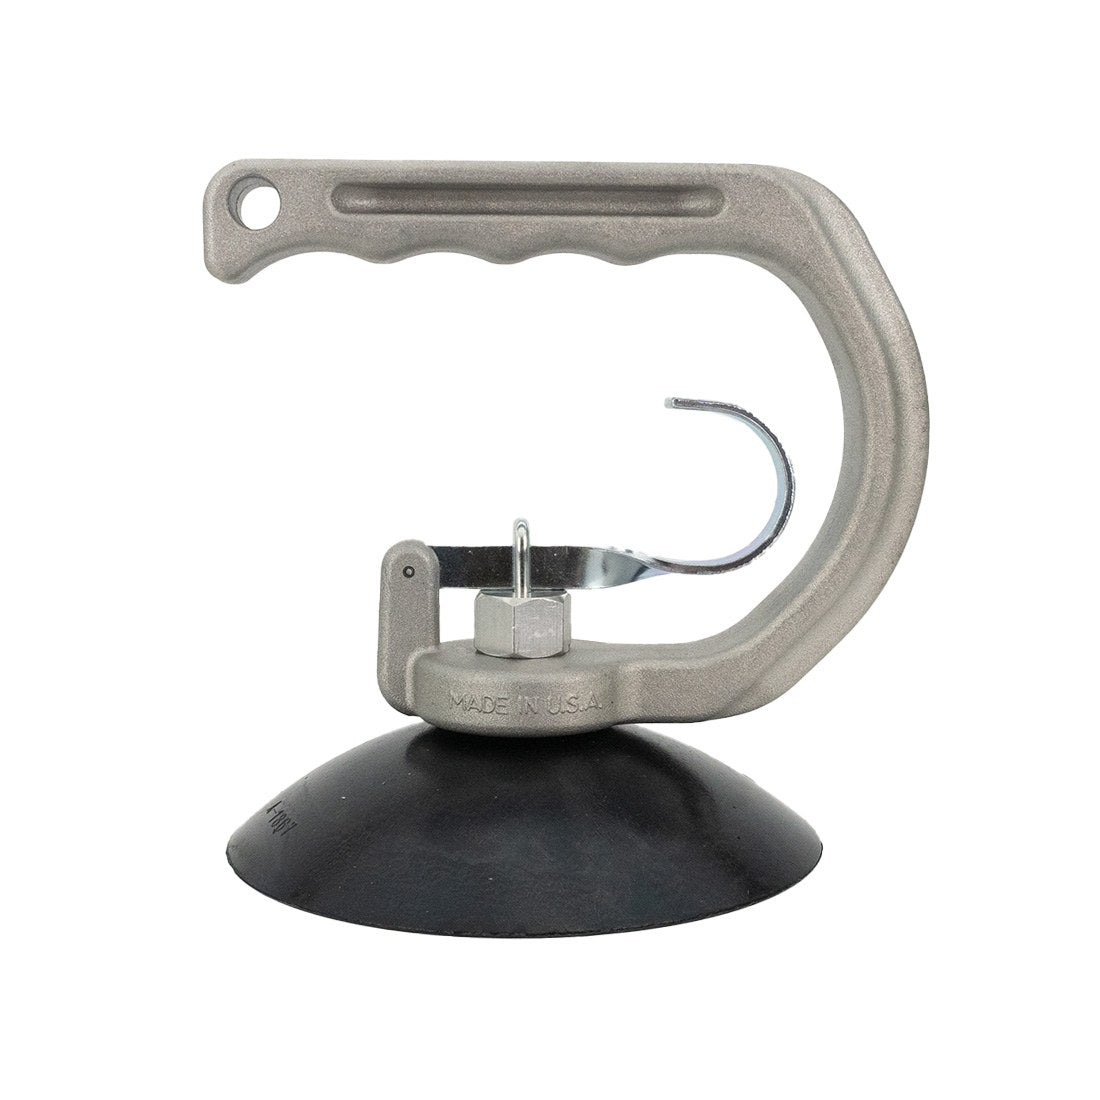 All-Vac Cup Vacu-Lifter - 5 Inch Front View